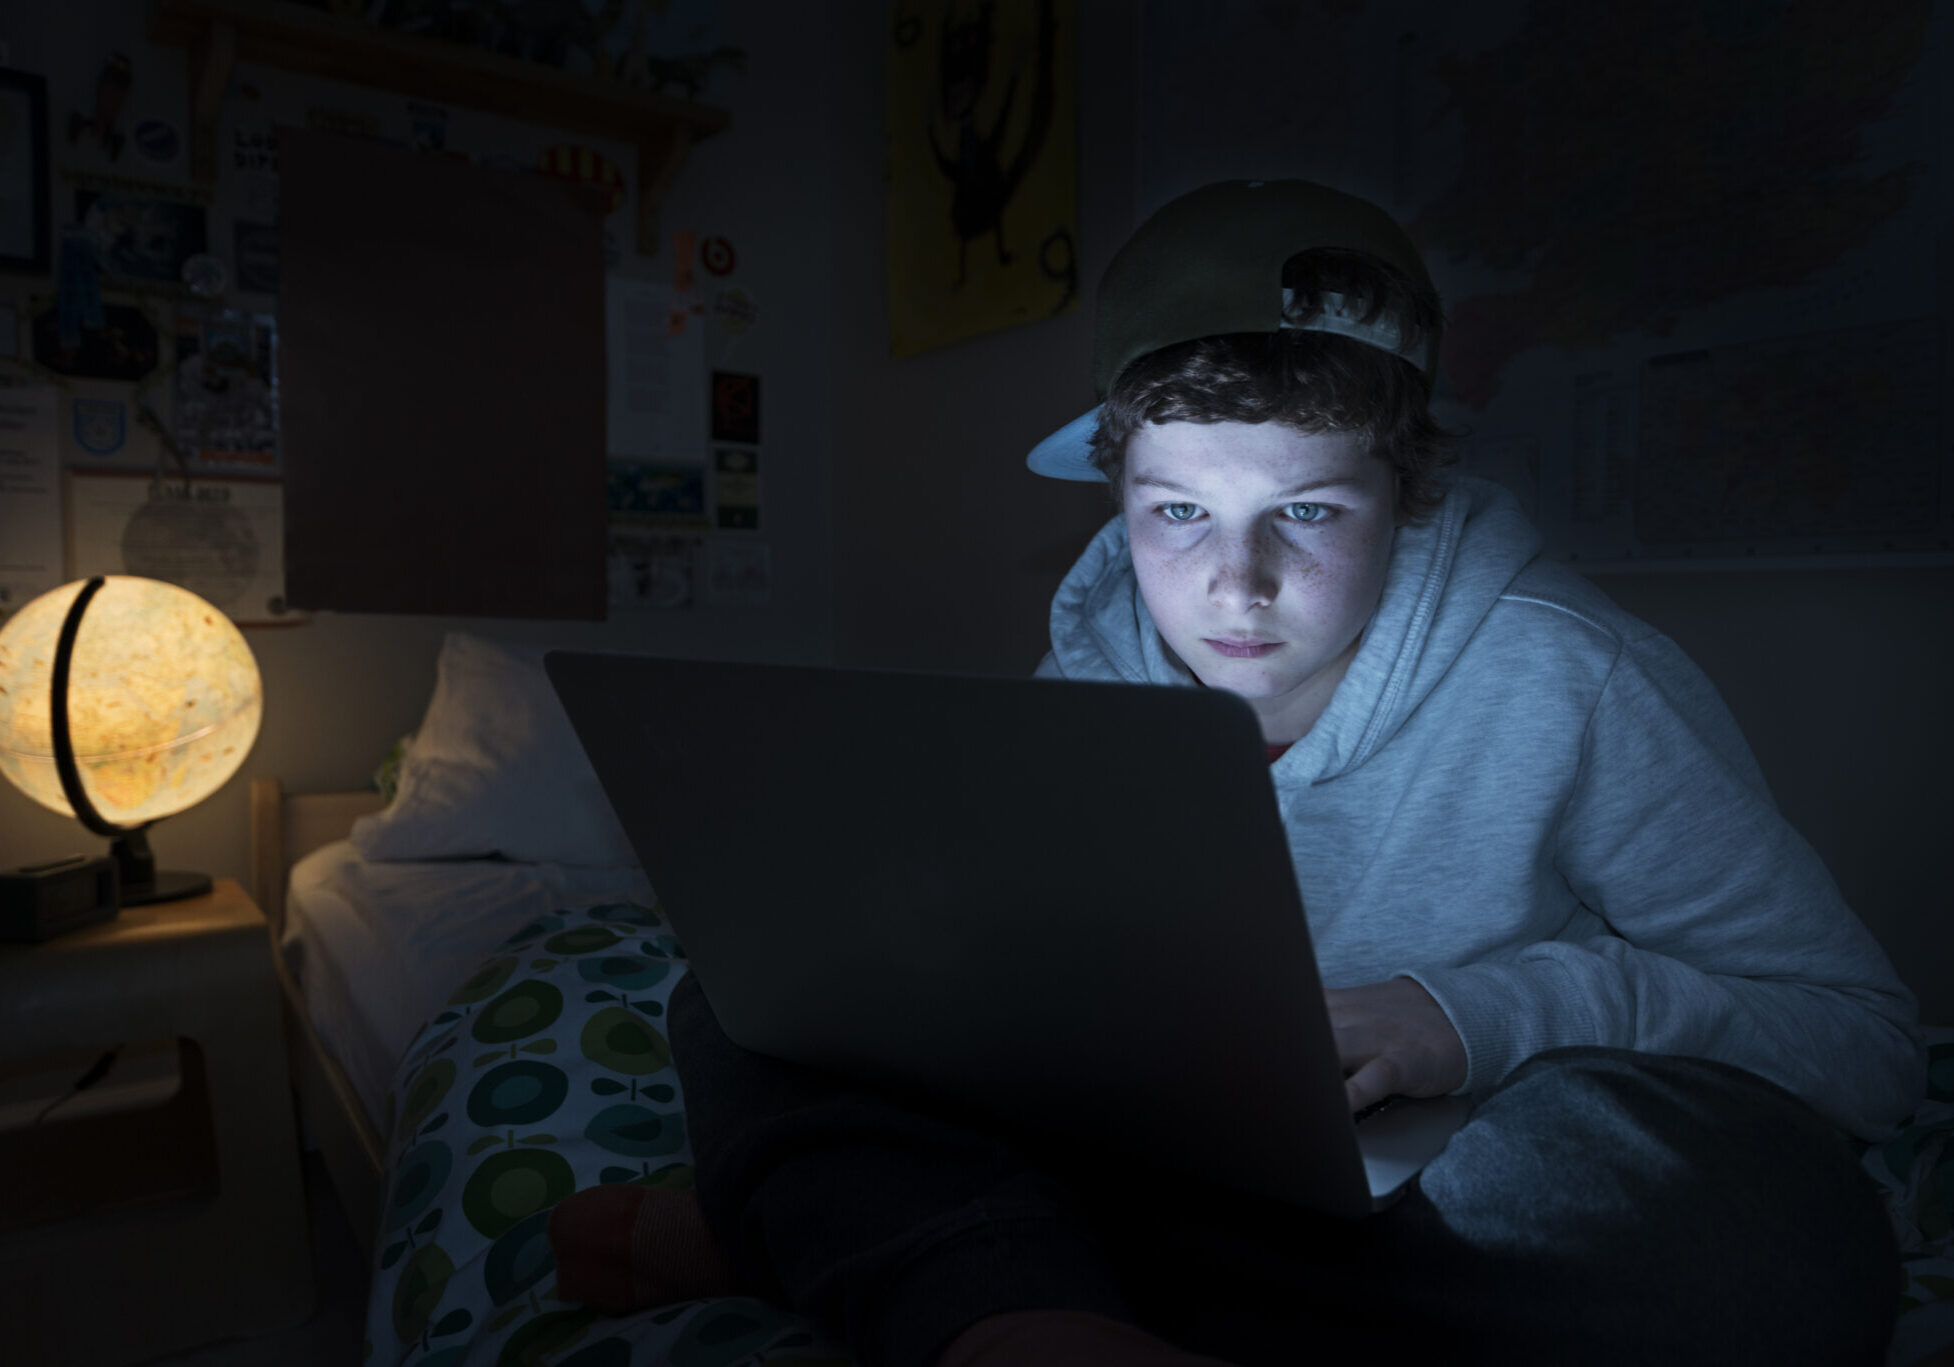 Portrait of a young teenage boy online in his bedroom. He is lying on his bed in a darkened room and he is illuminated by the light coming from the screen from his laptop as he surfs the web late at night.